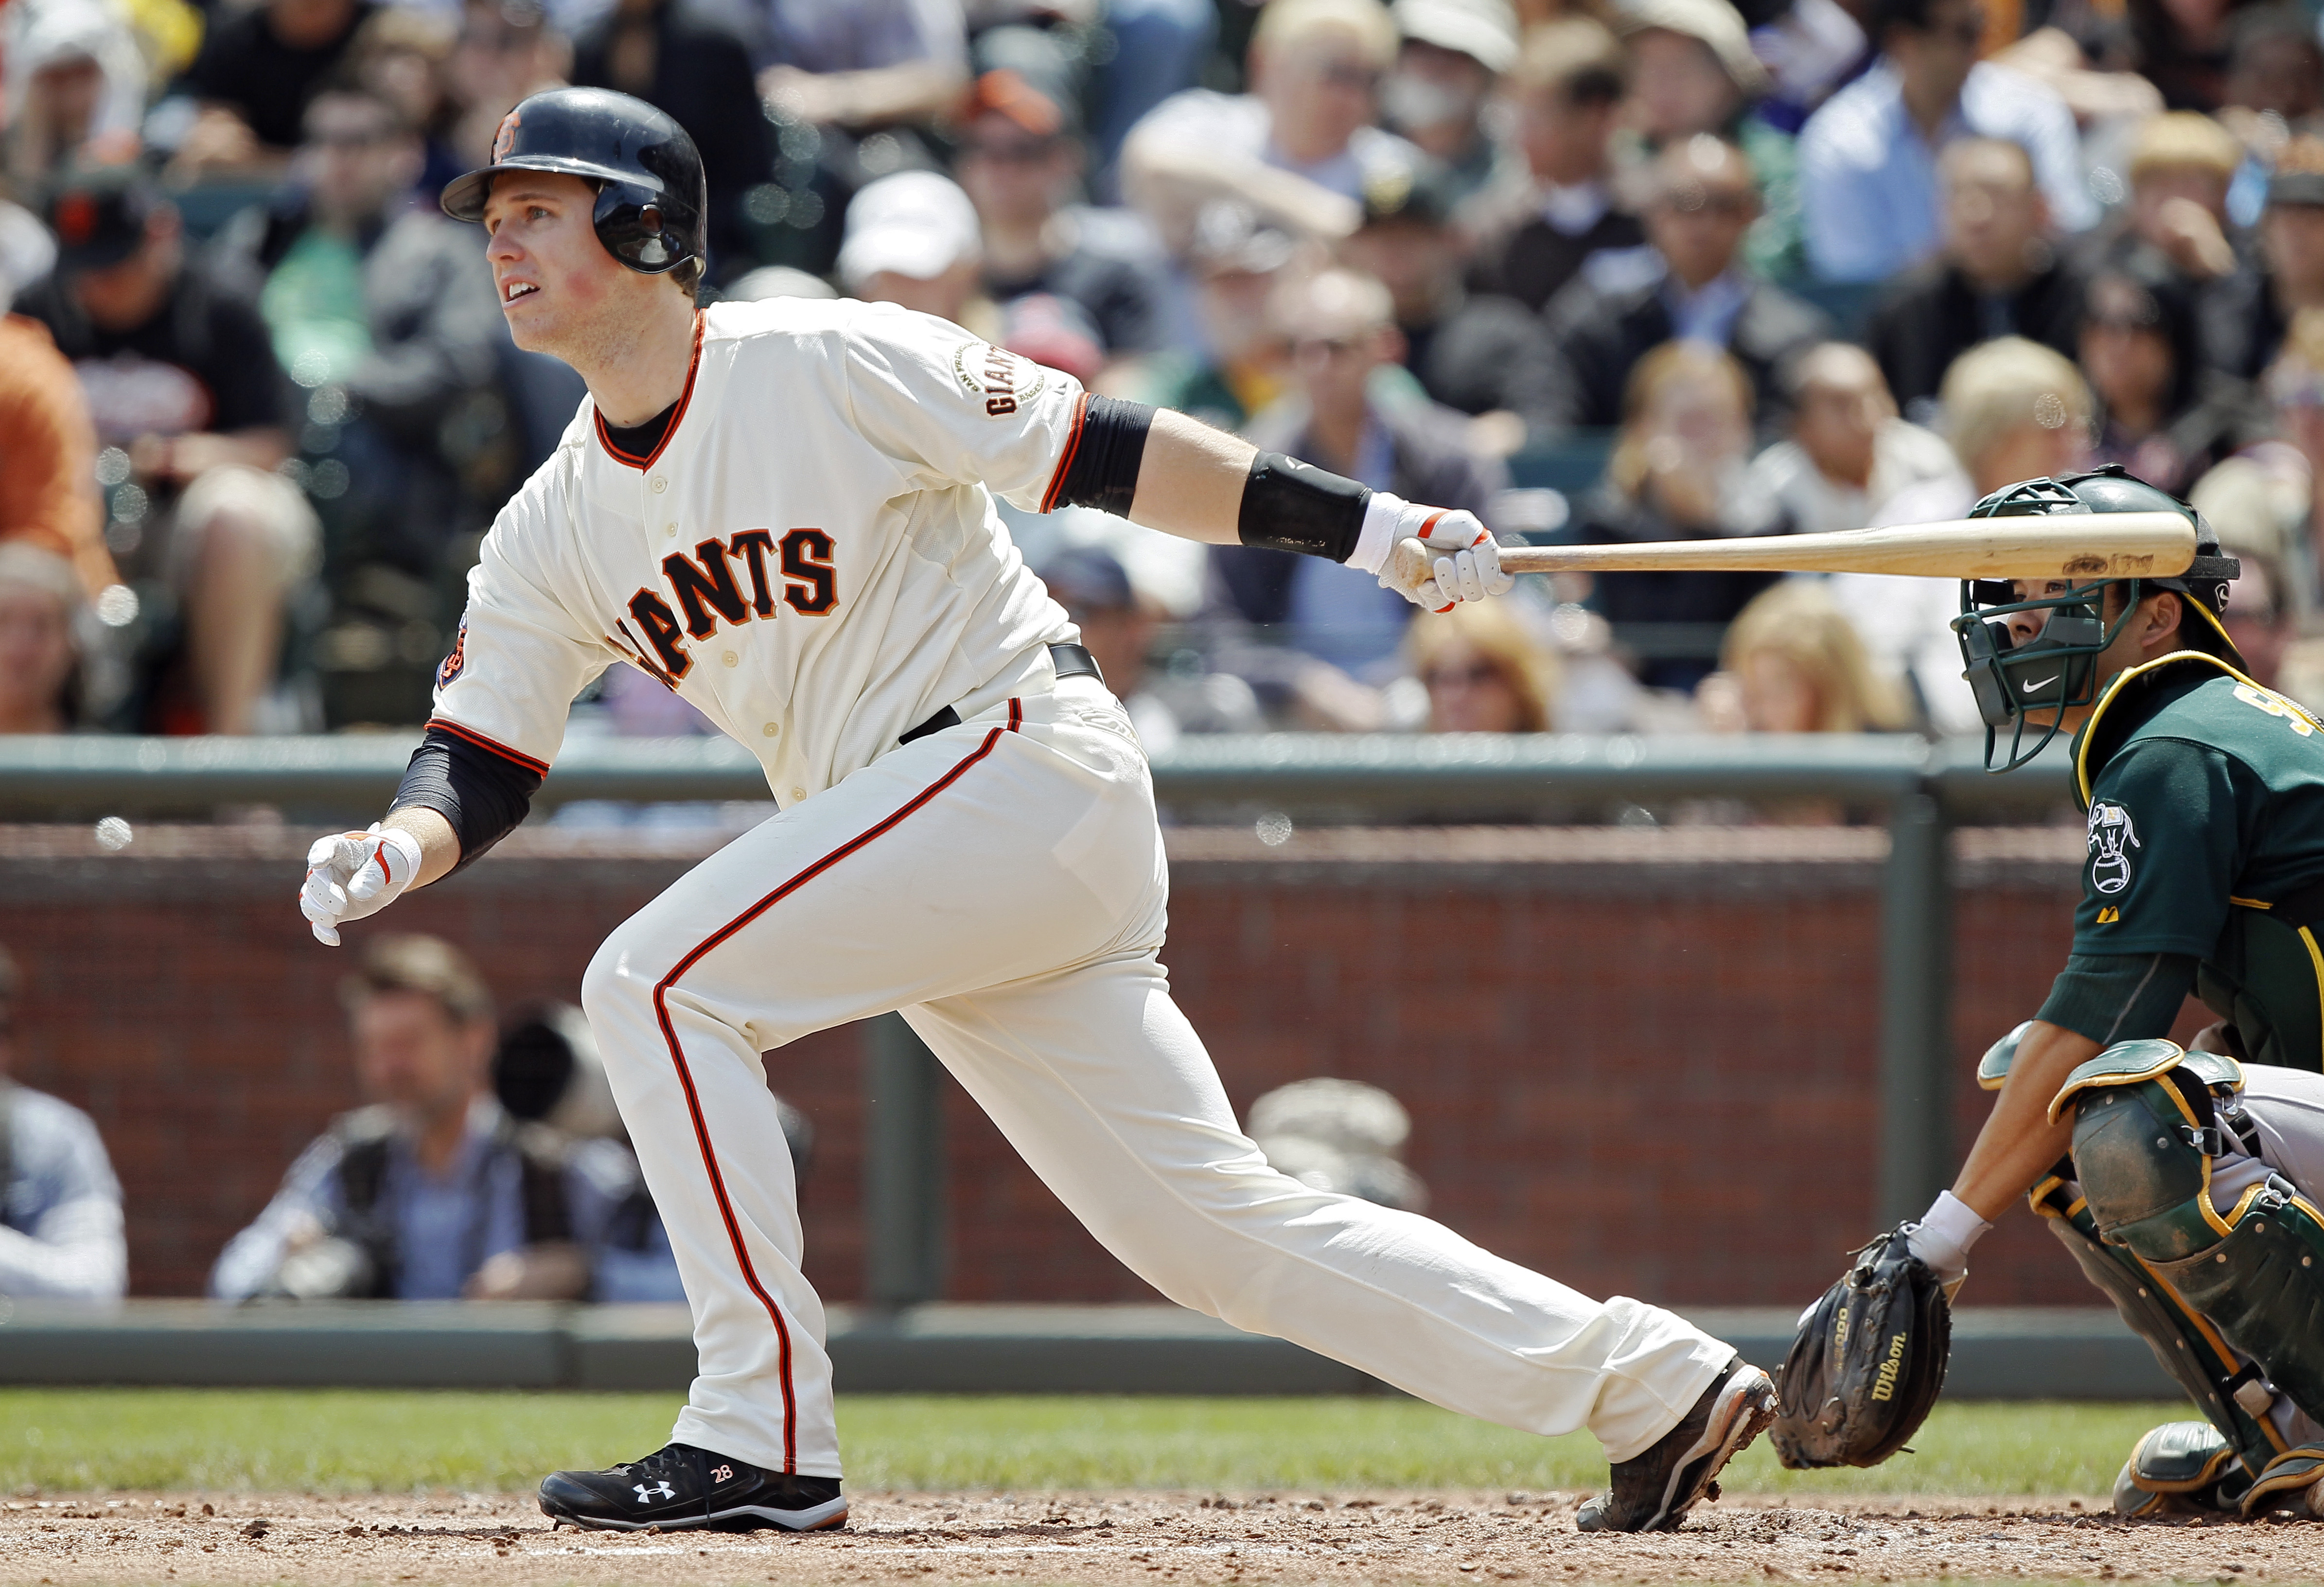 San Francisco Giants: Buster Posey and the Worst Collisions in MLB